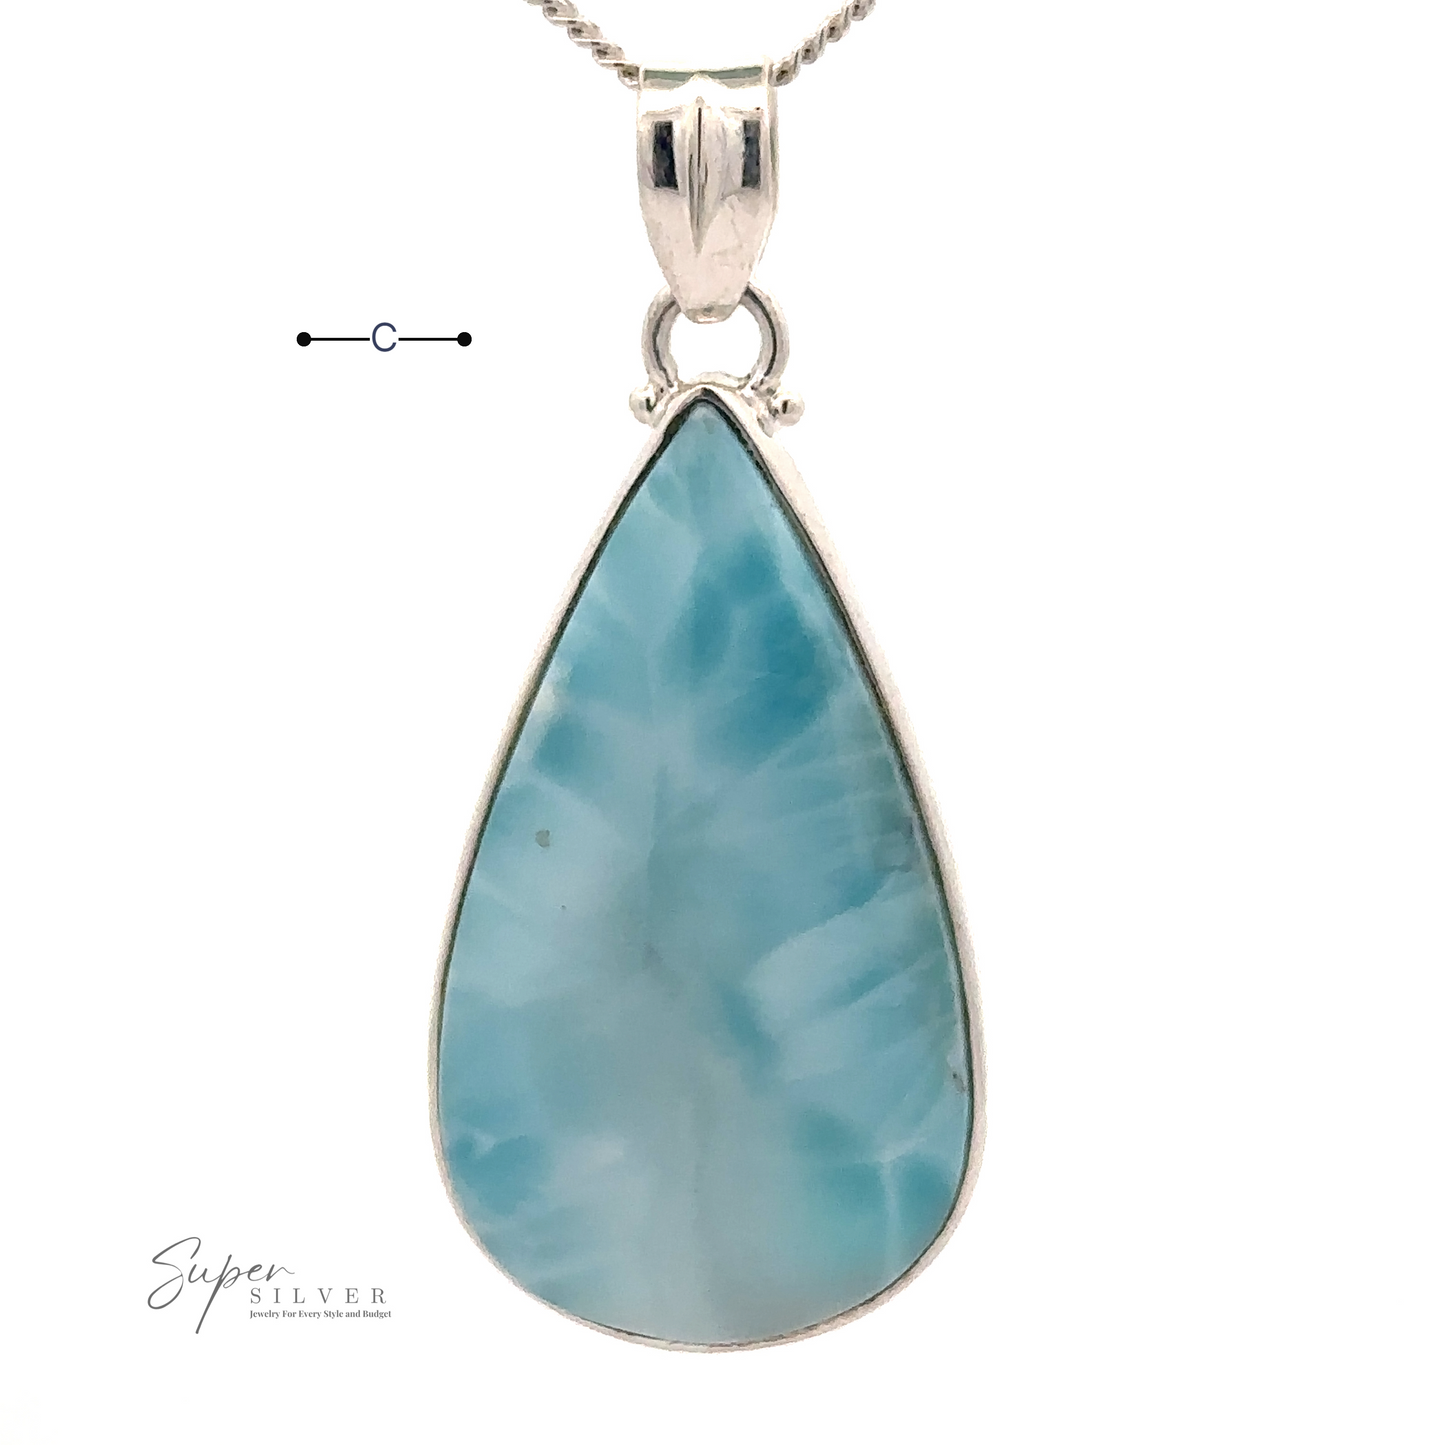 
                  
                    A Larger Teardrop Larimar Pendant set in sterling silver with a chain. The logo "Super Silver" is visible in the bottom left corner.
                  
                